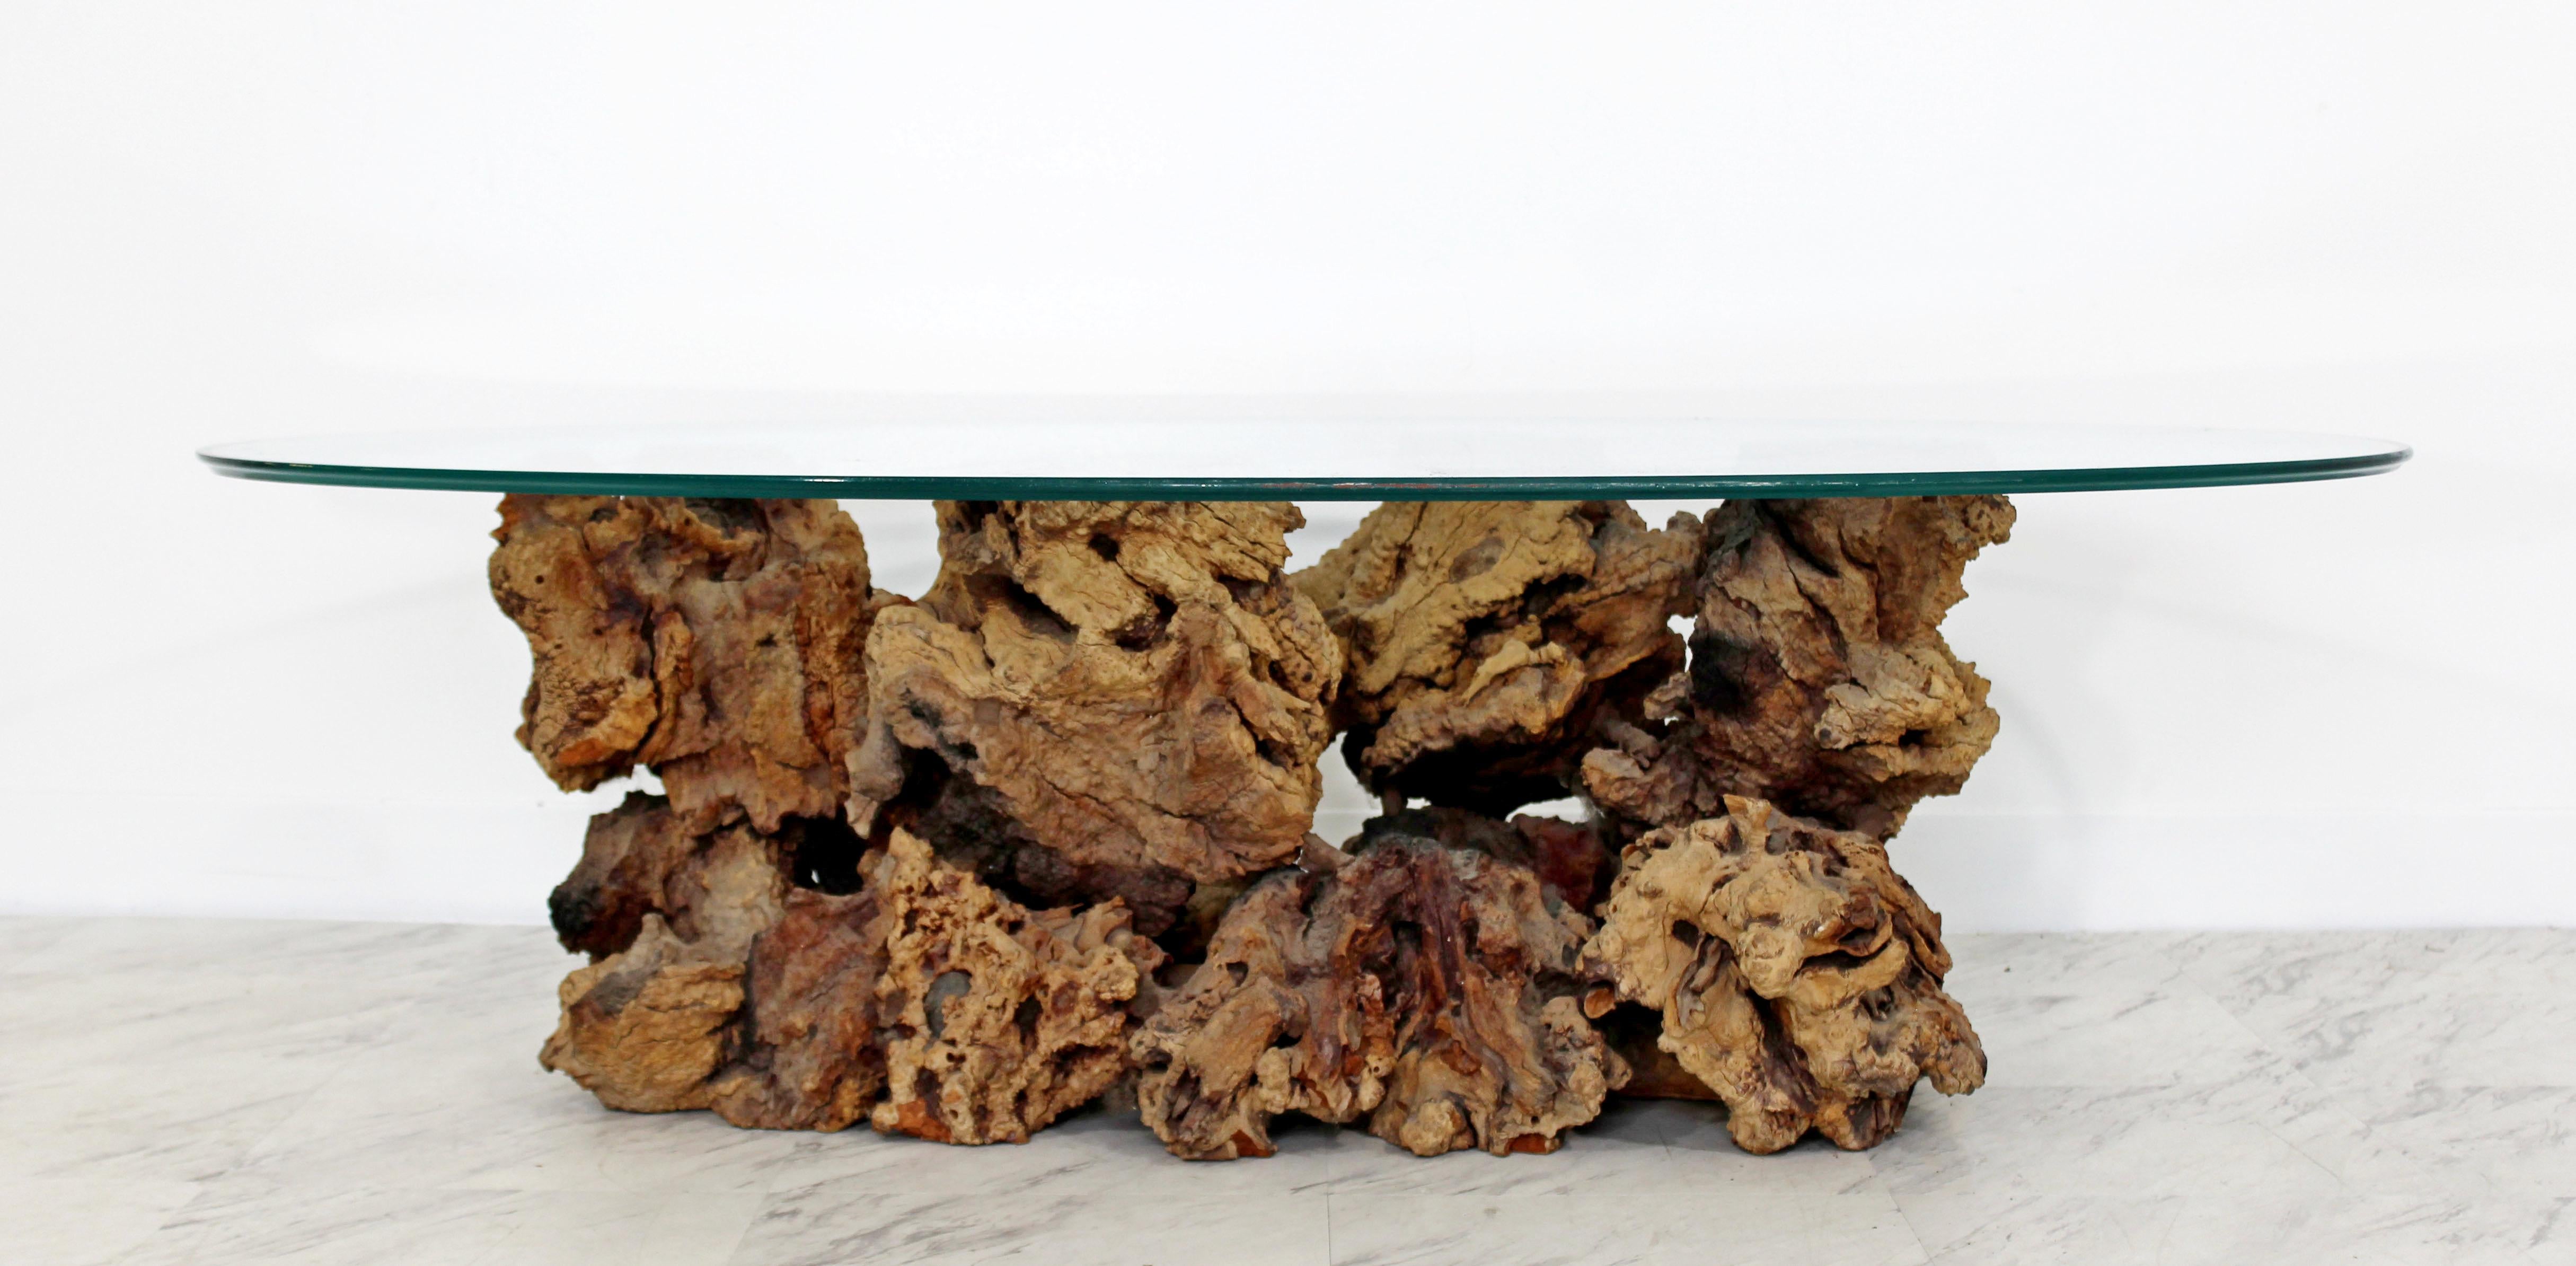 For your consideration is a marvelous coffee table, made of burl driftwood and with an ovular glass top, circa the 1960s. In excellent condition. The dimensions are 52